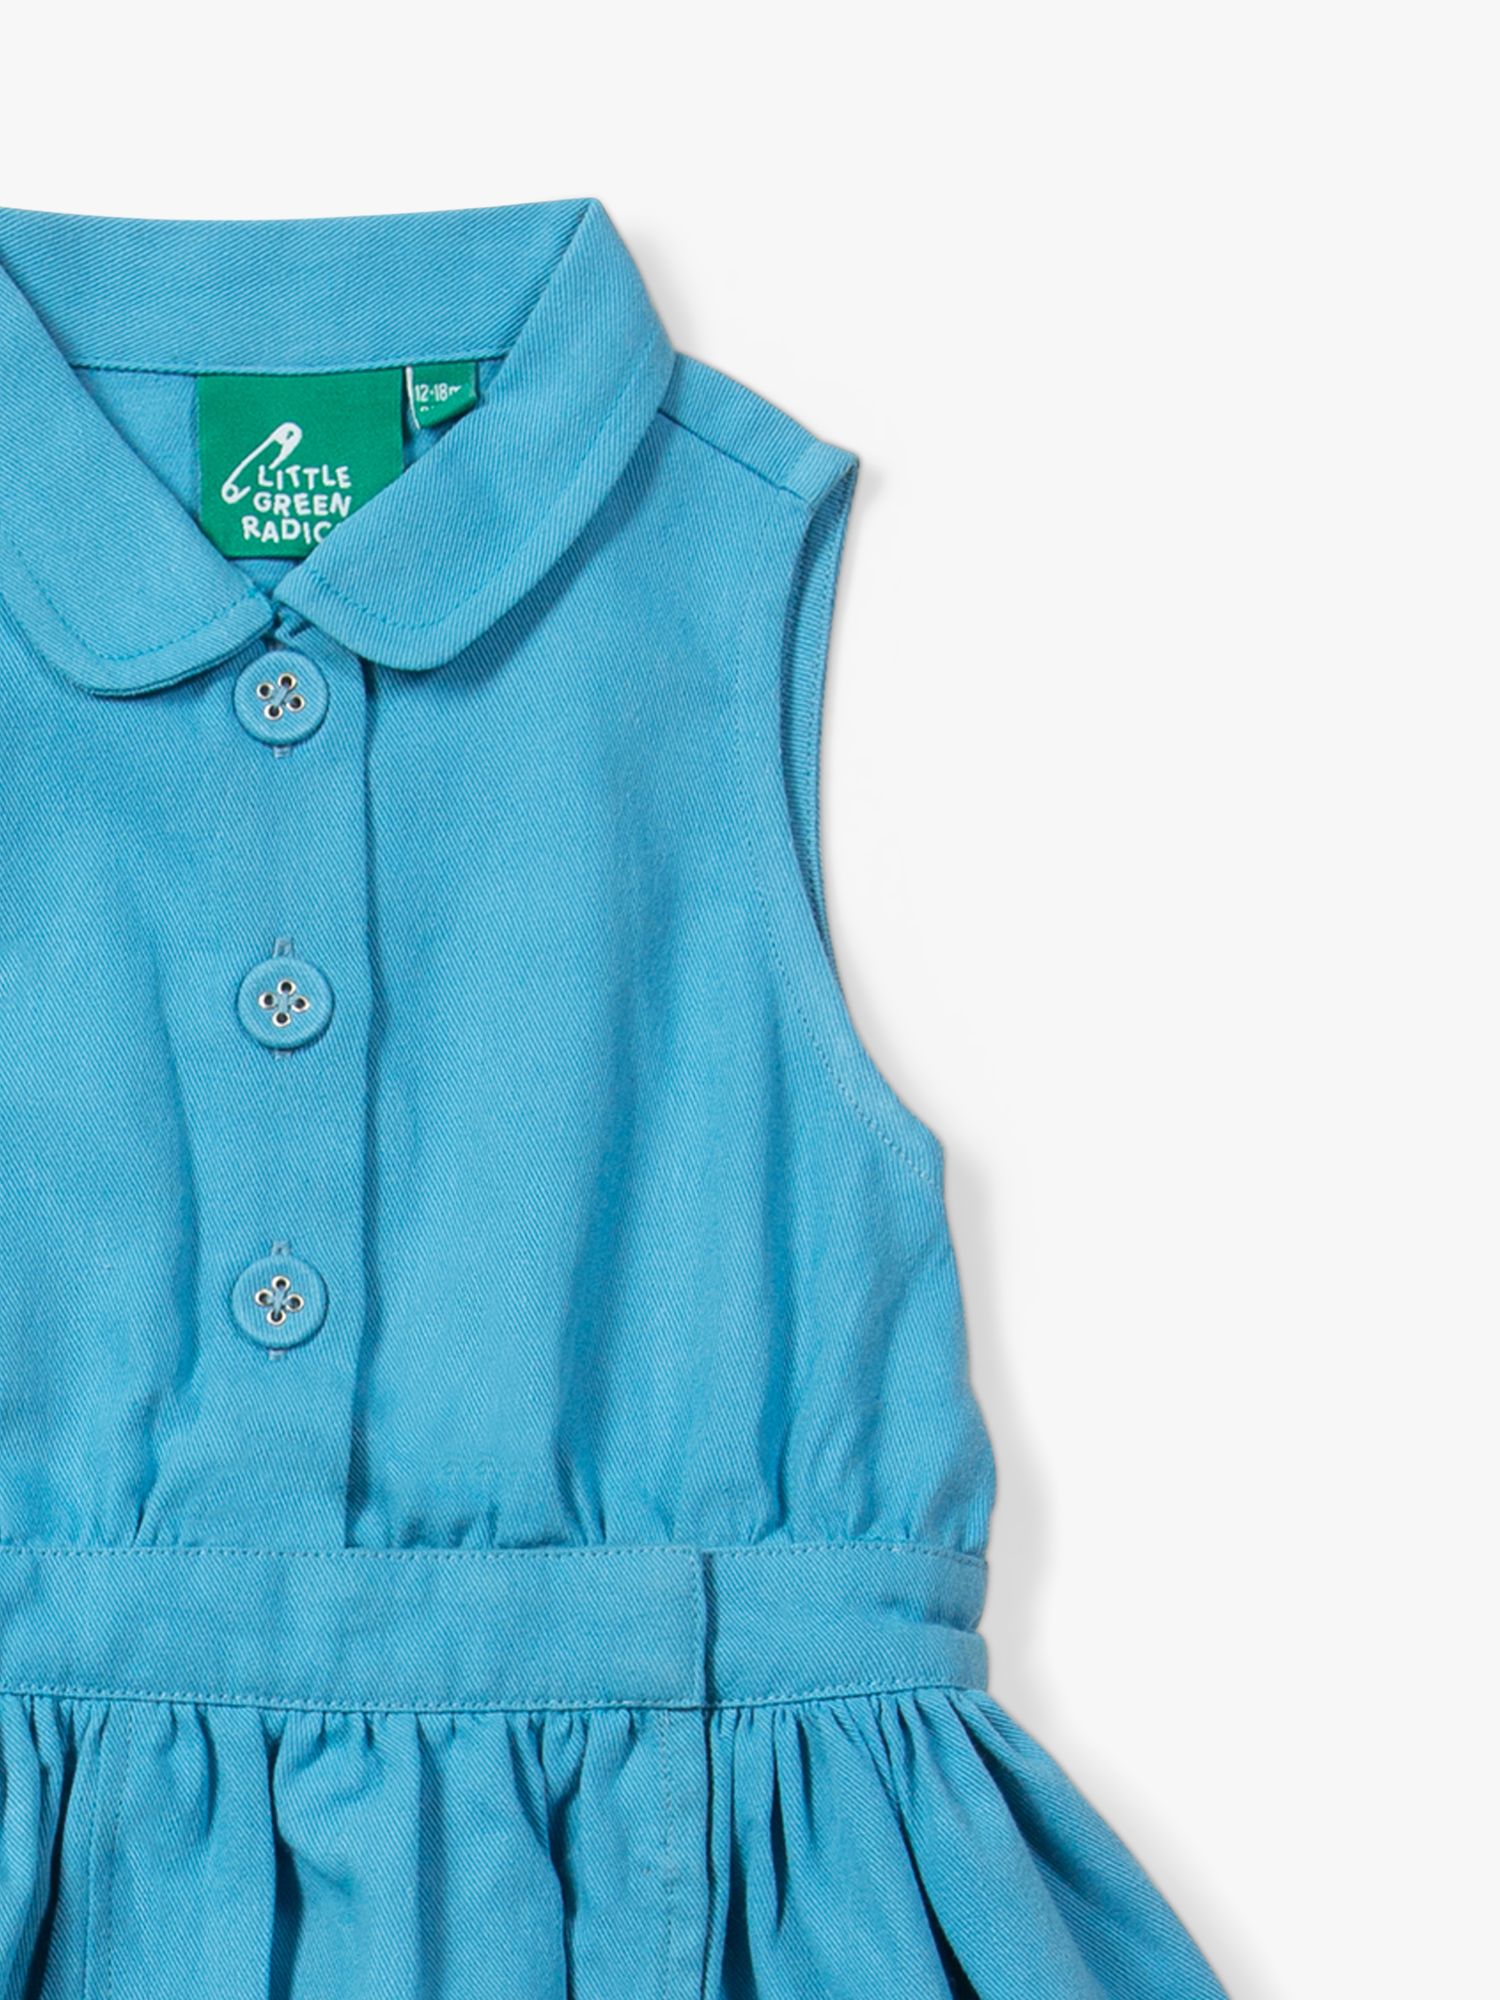 Little Green Radicals Baby Organic Cotton Pinafore Button Dress, Blue Moon Solid, 4-5 years